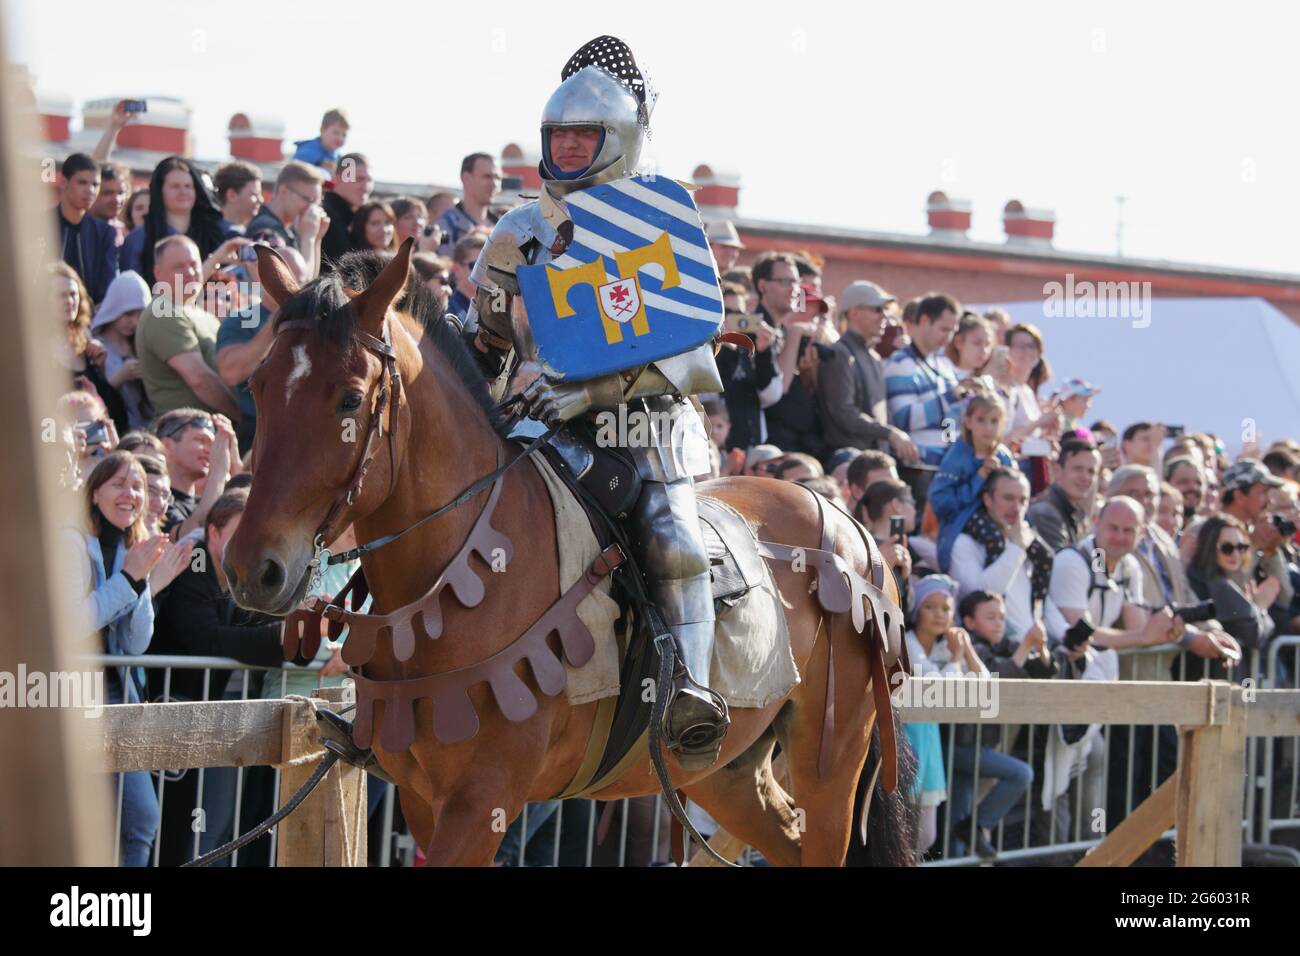 St. Petersburg, Russia - July 8, 2017: Armored knight on horse participating in the jousting tournament during the military history project Battle on Neva Stock Photo